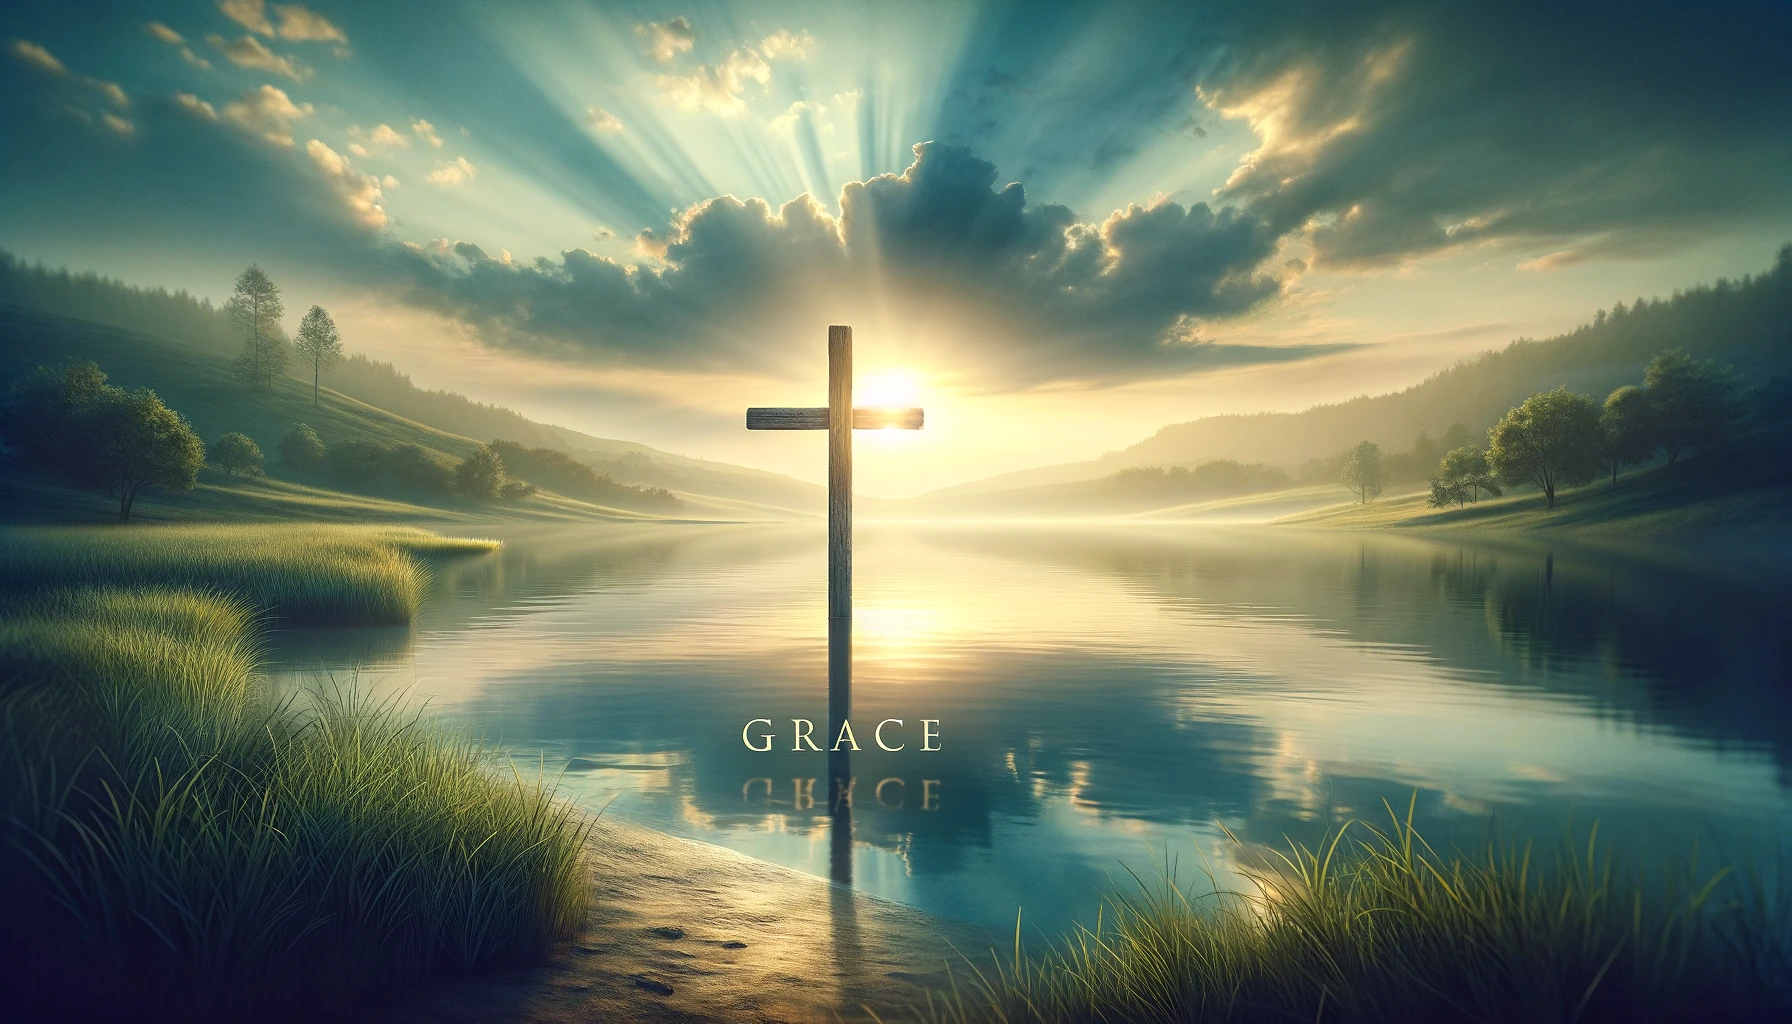 Grace and truth through Christ: The video begins with a reference to John 1:14-17, emphasizing that while the law was given through Moses, grace and truth came through Jesus Christ.